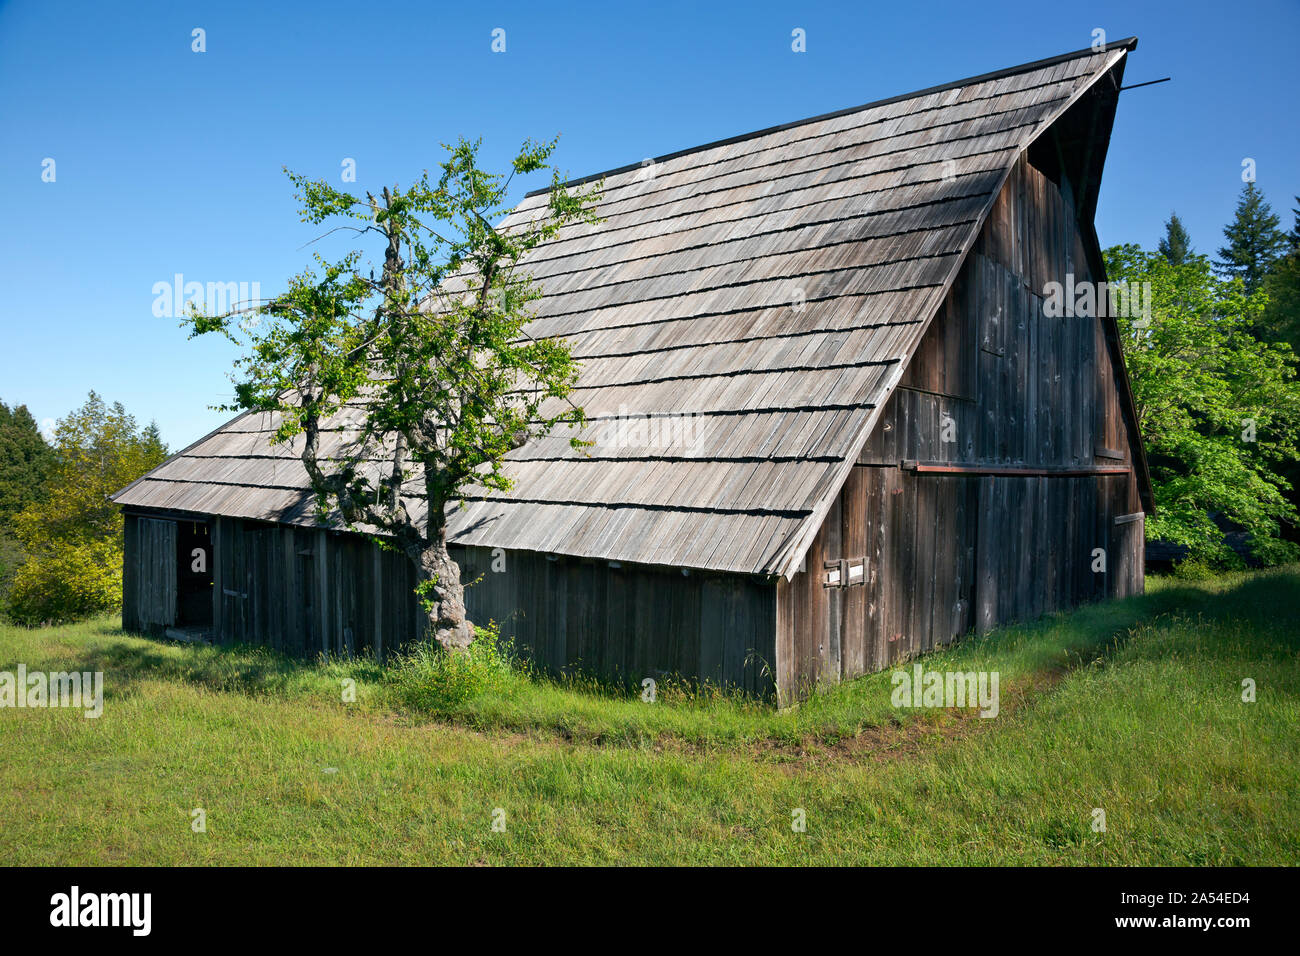 CA03733-00...CALIFORNIA - Barn at historic Lyons Sheep Ranch located in the Bald Hills section of Redwoods National Park. Stock Photo